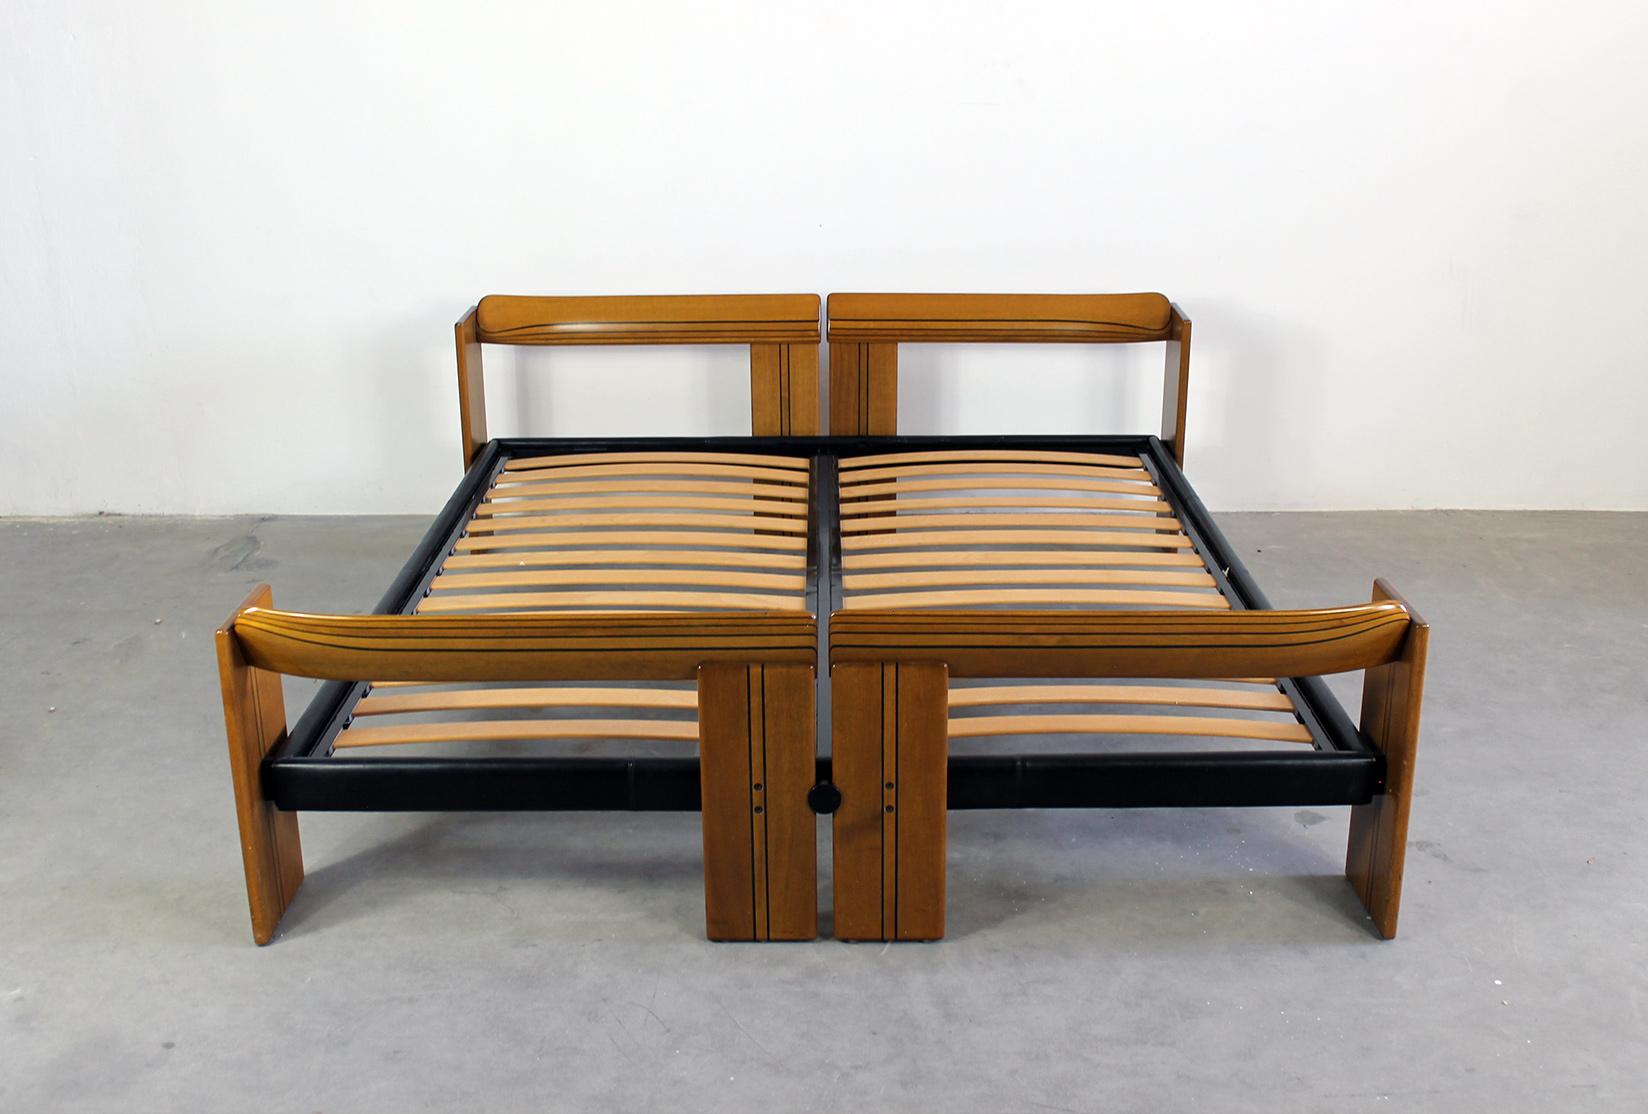 Tobia & Afra Scarpa Bedroom Set Artona with Bed and Nightstands by Maxalto 1970s For Sale 1